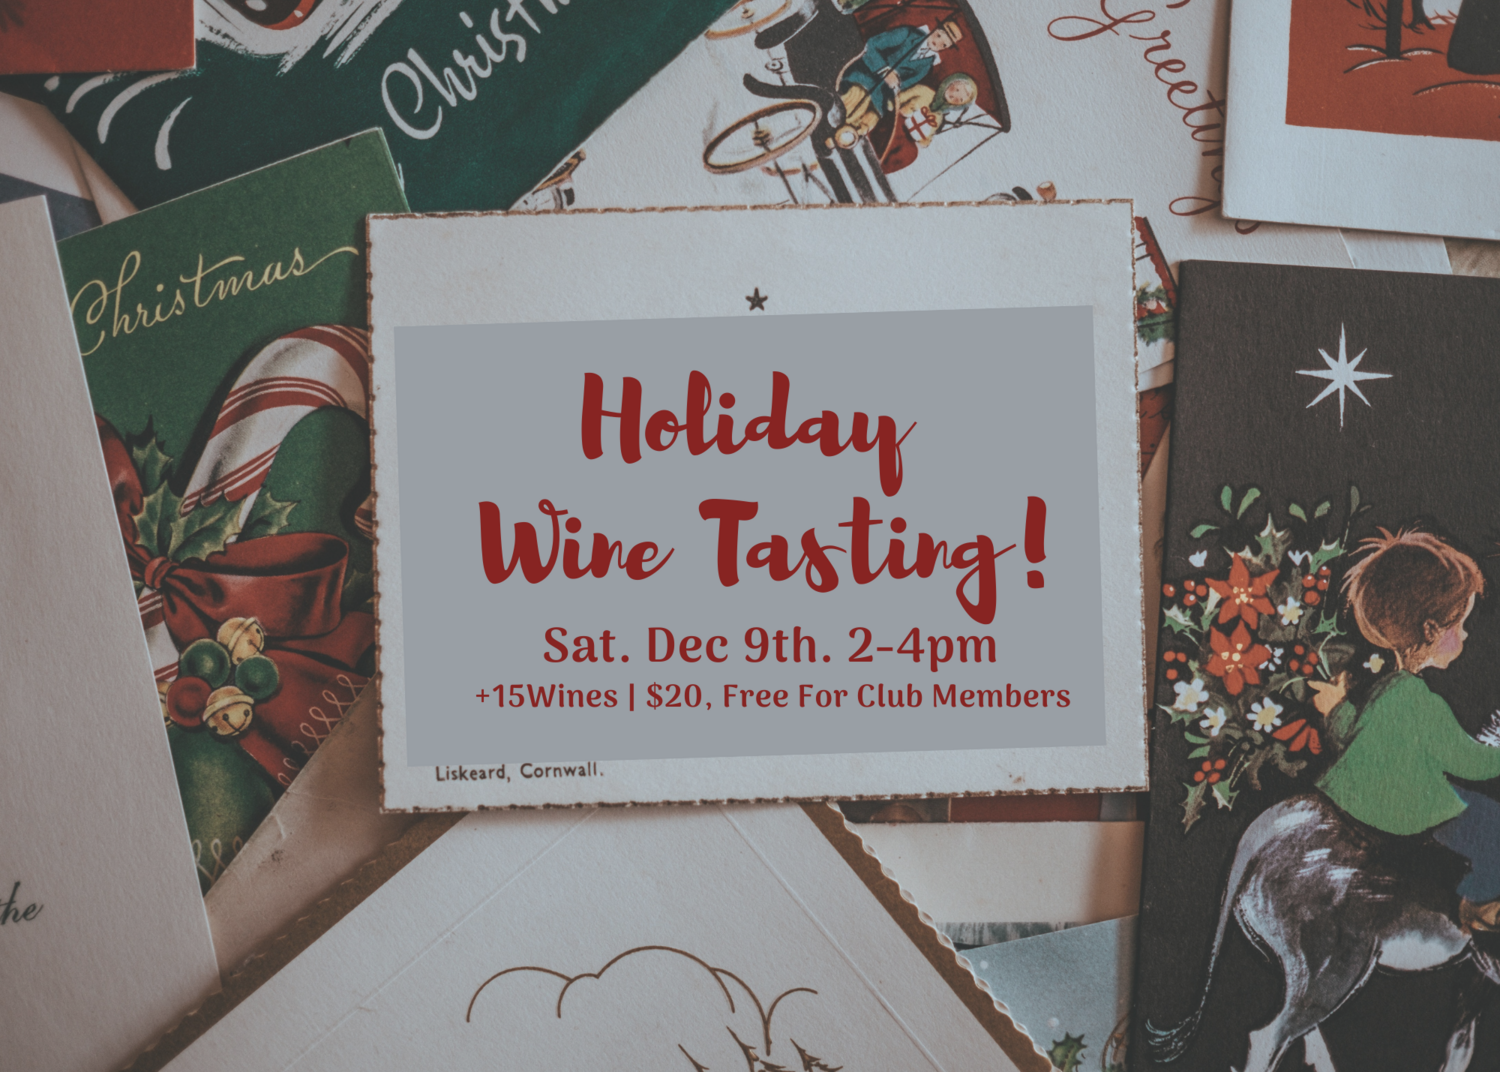 3rd Annual Holiday Wine Tasting - December 9, 2-4pm